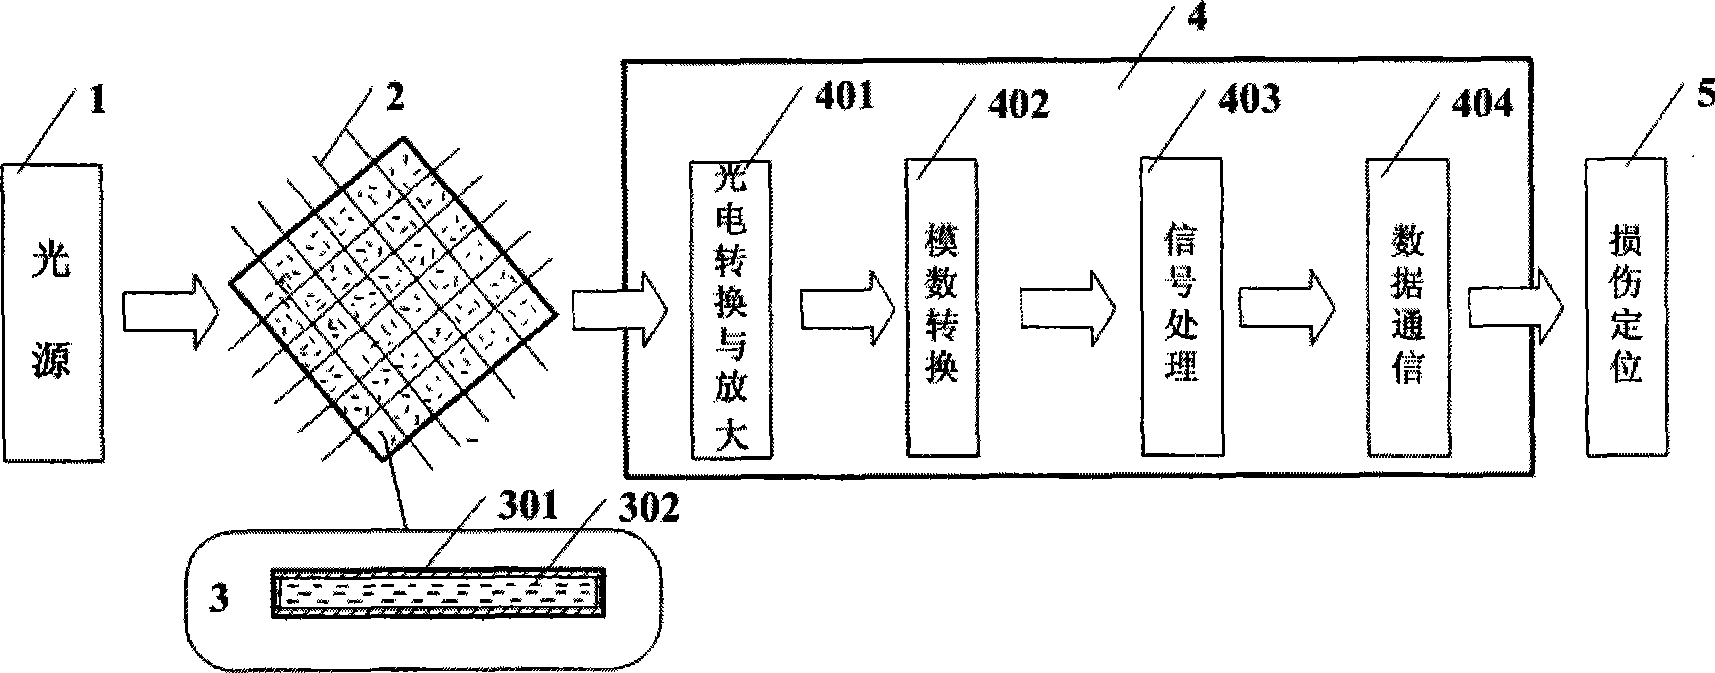 Intelligent structure self-healing method and health monitoring system based on light repairing technology